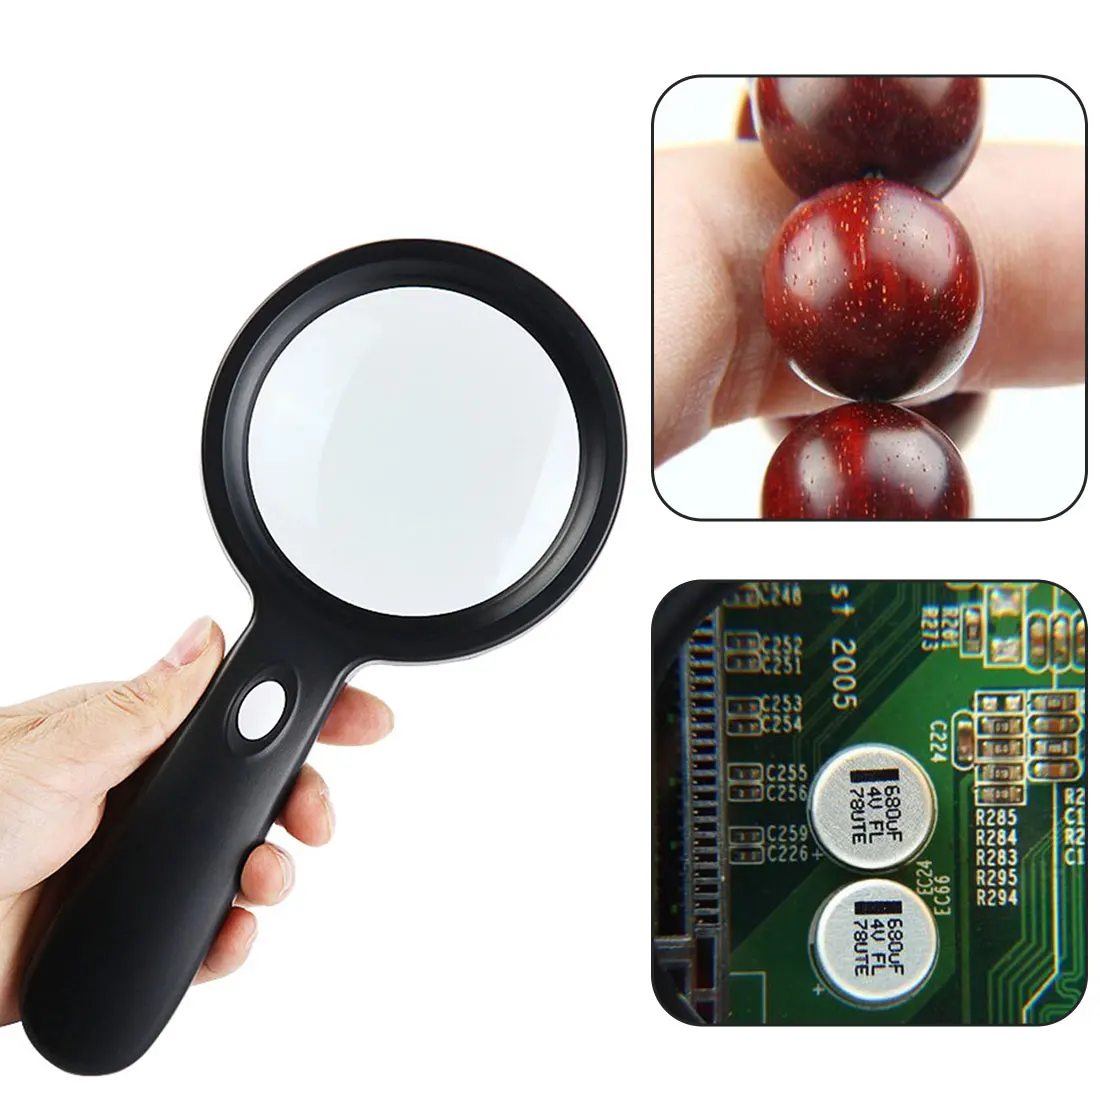 

Lighted Magnifying Glass-10X Hand held Large Reading Magnifying Glasses with 12 LED Illuminated Light for Seniors, Repair, Coins